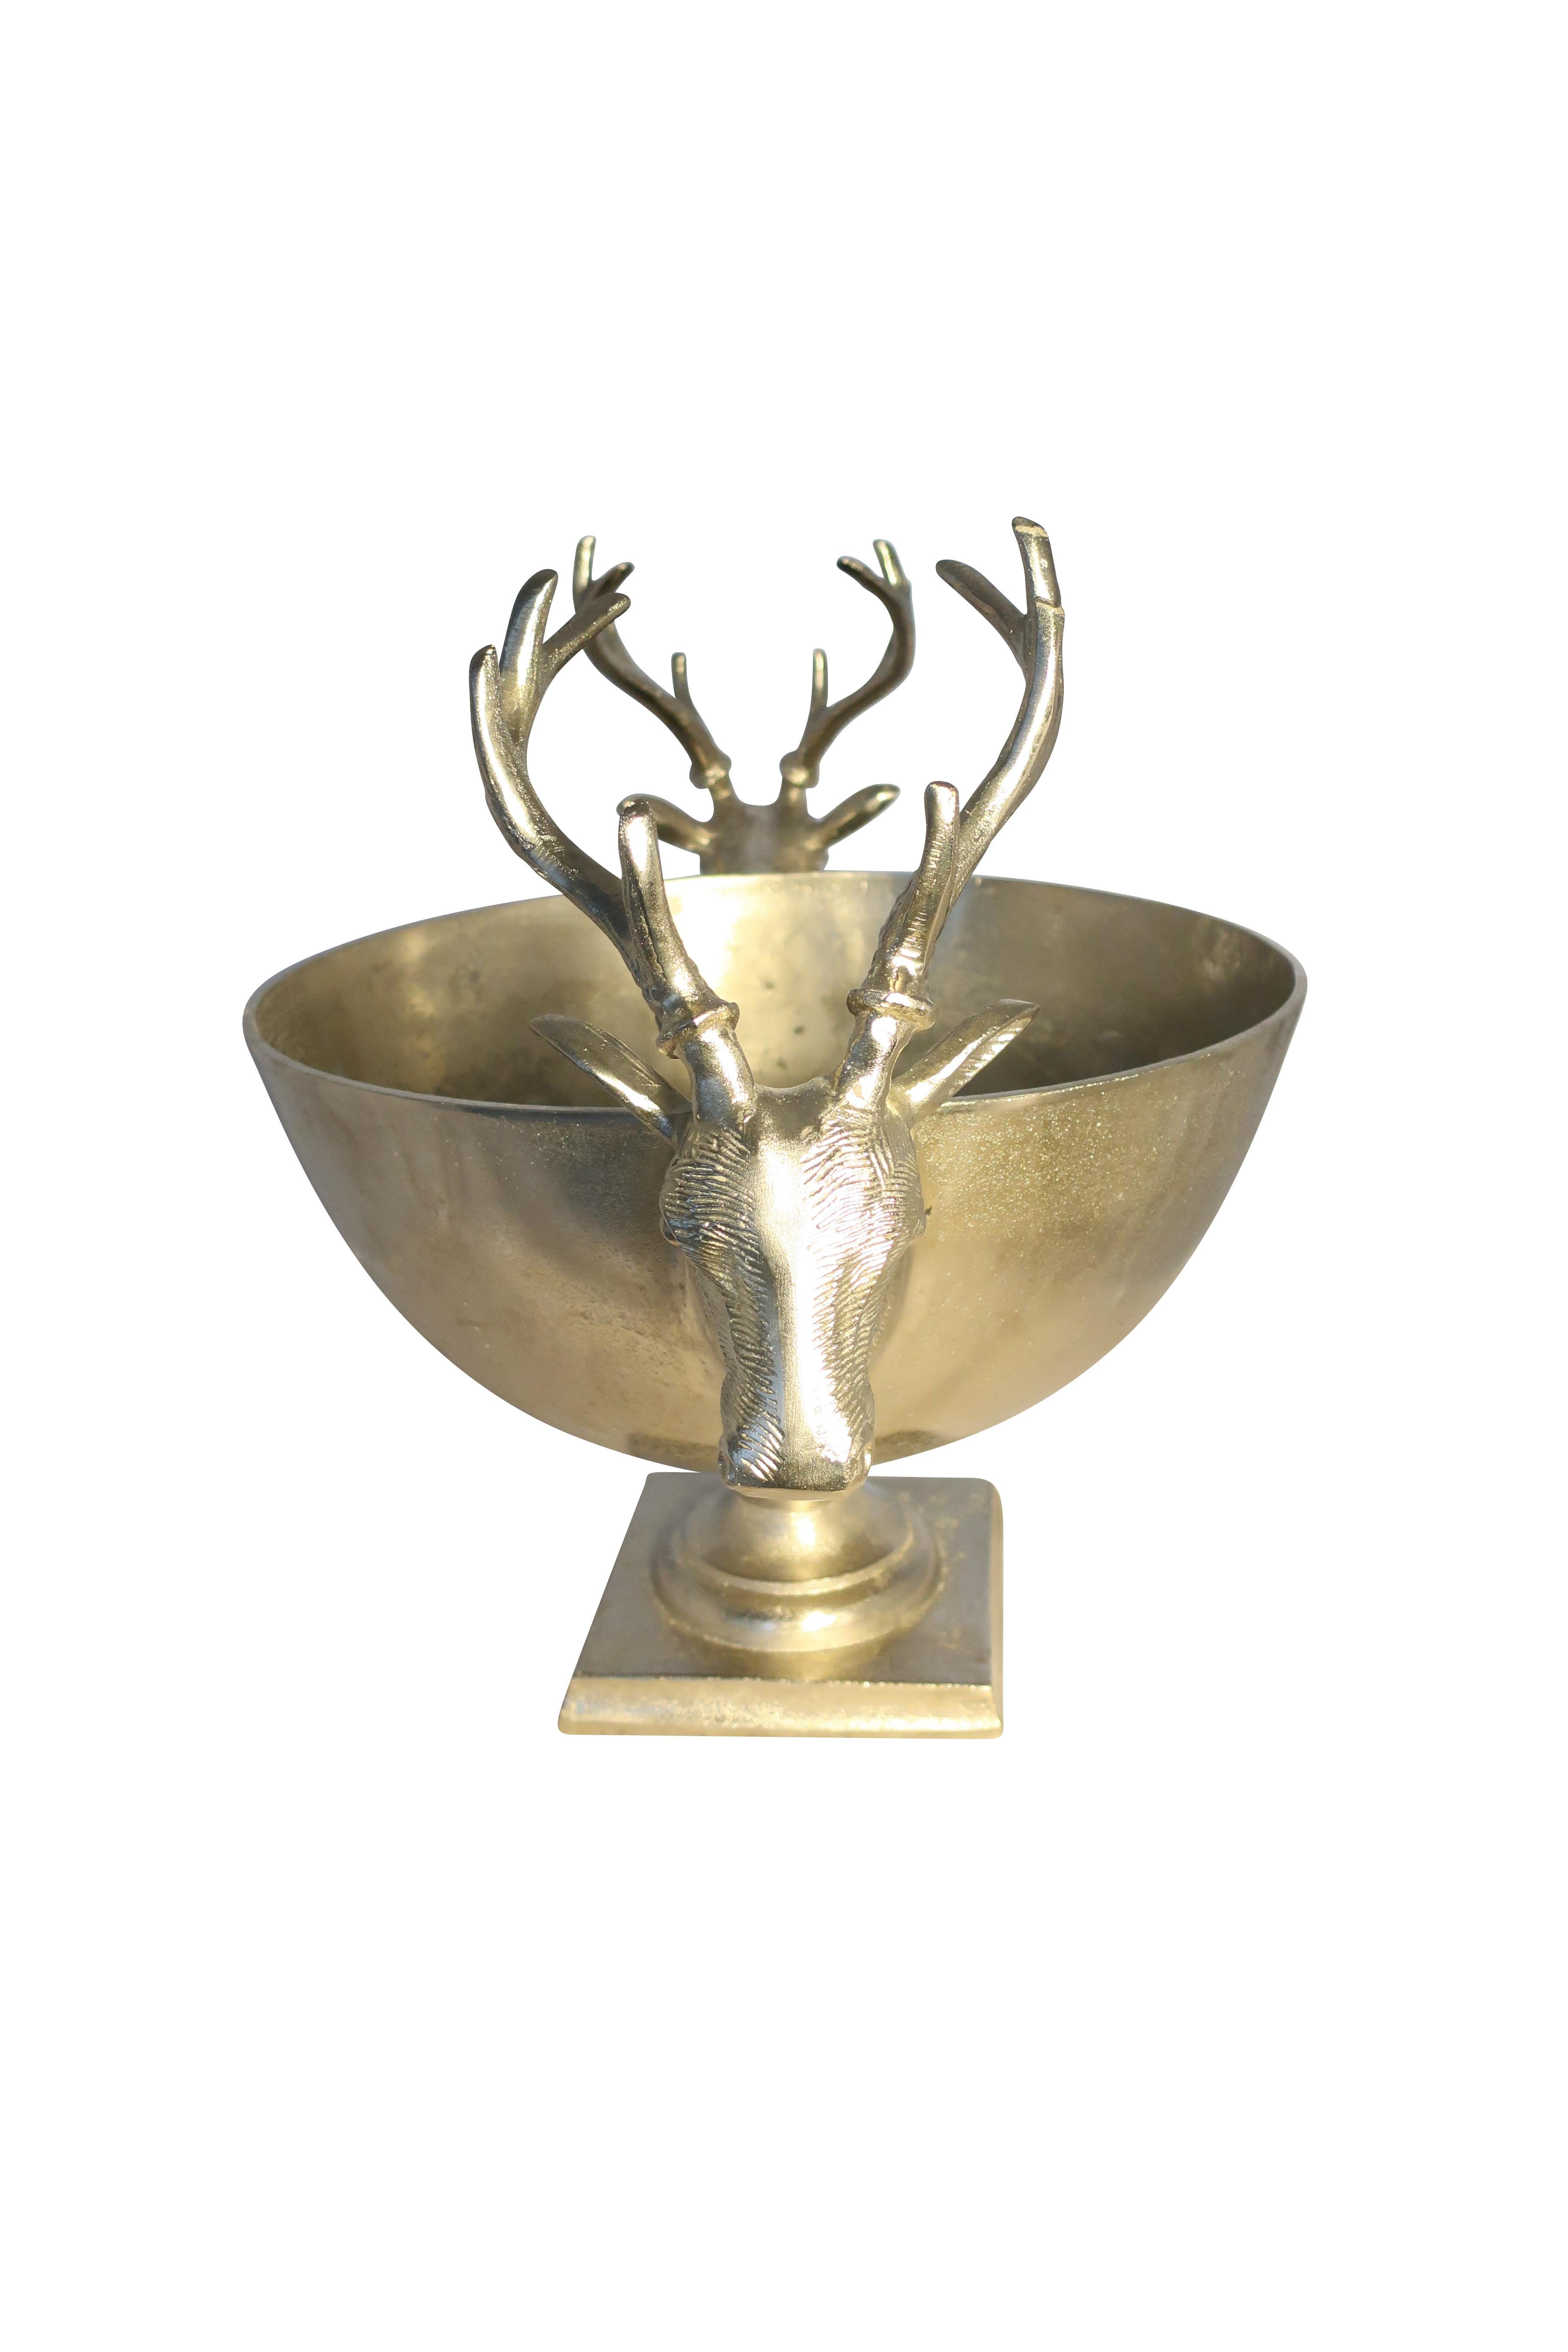 Stag champagne bucket / planter in metal- small size.